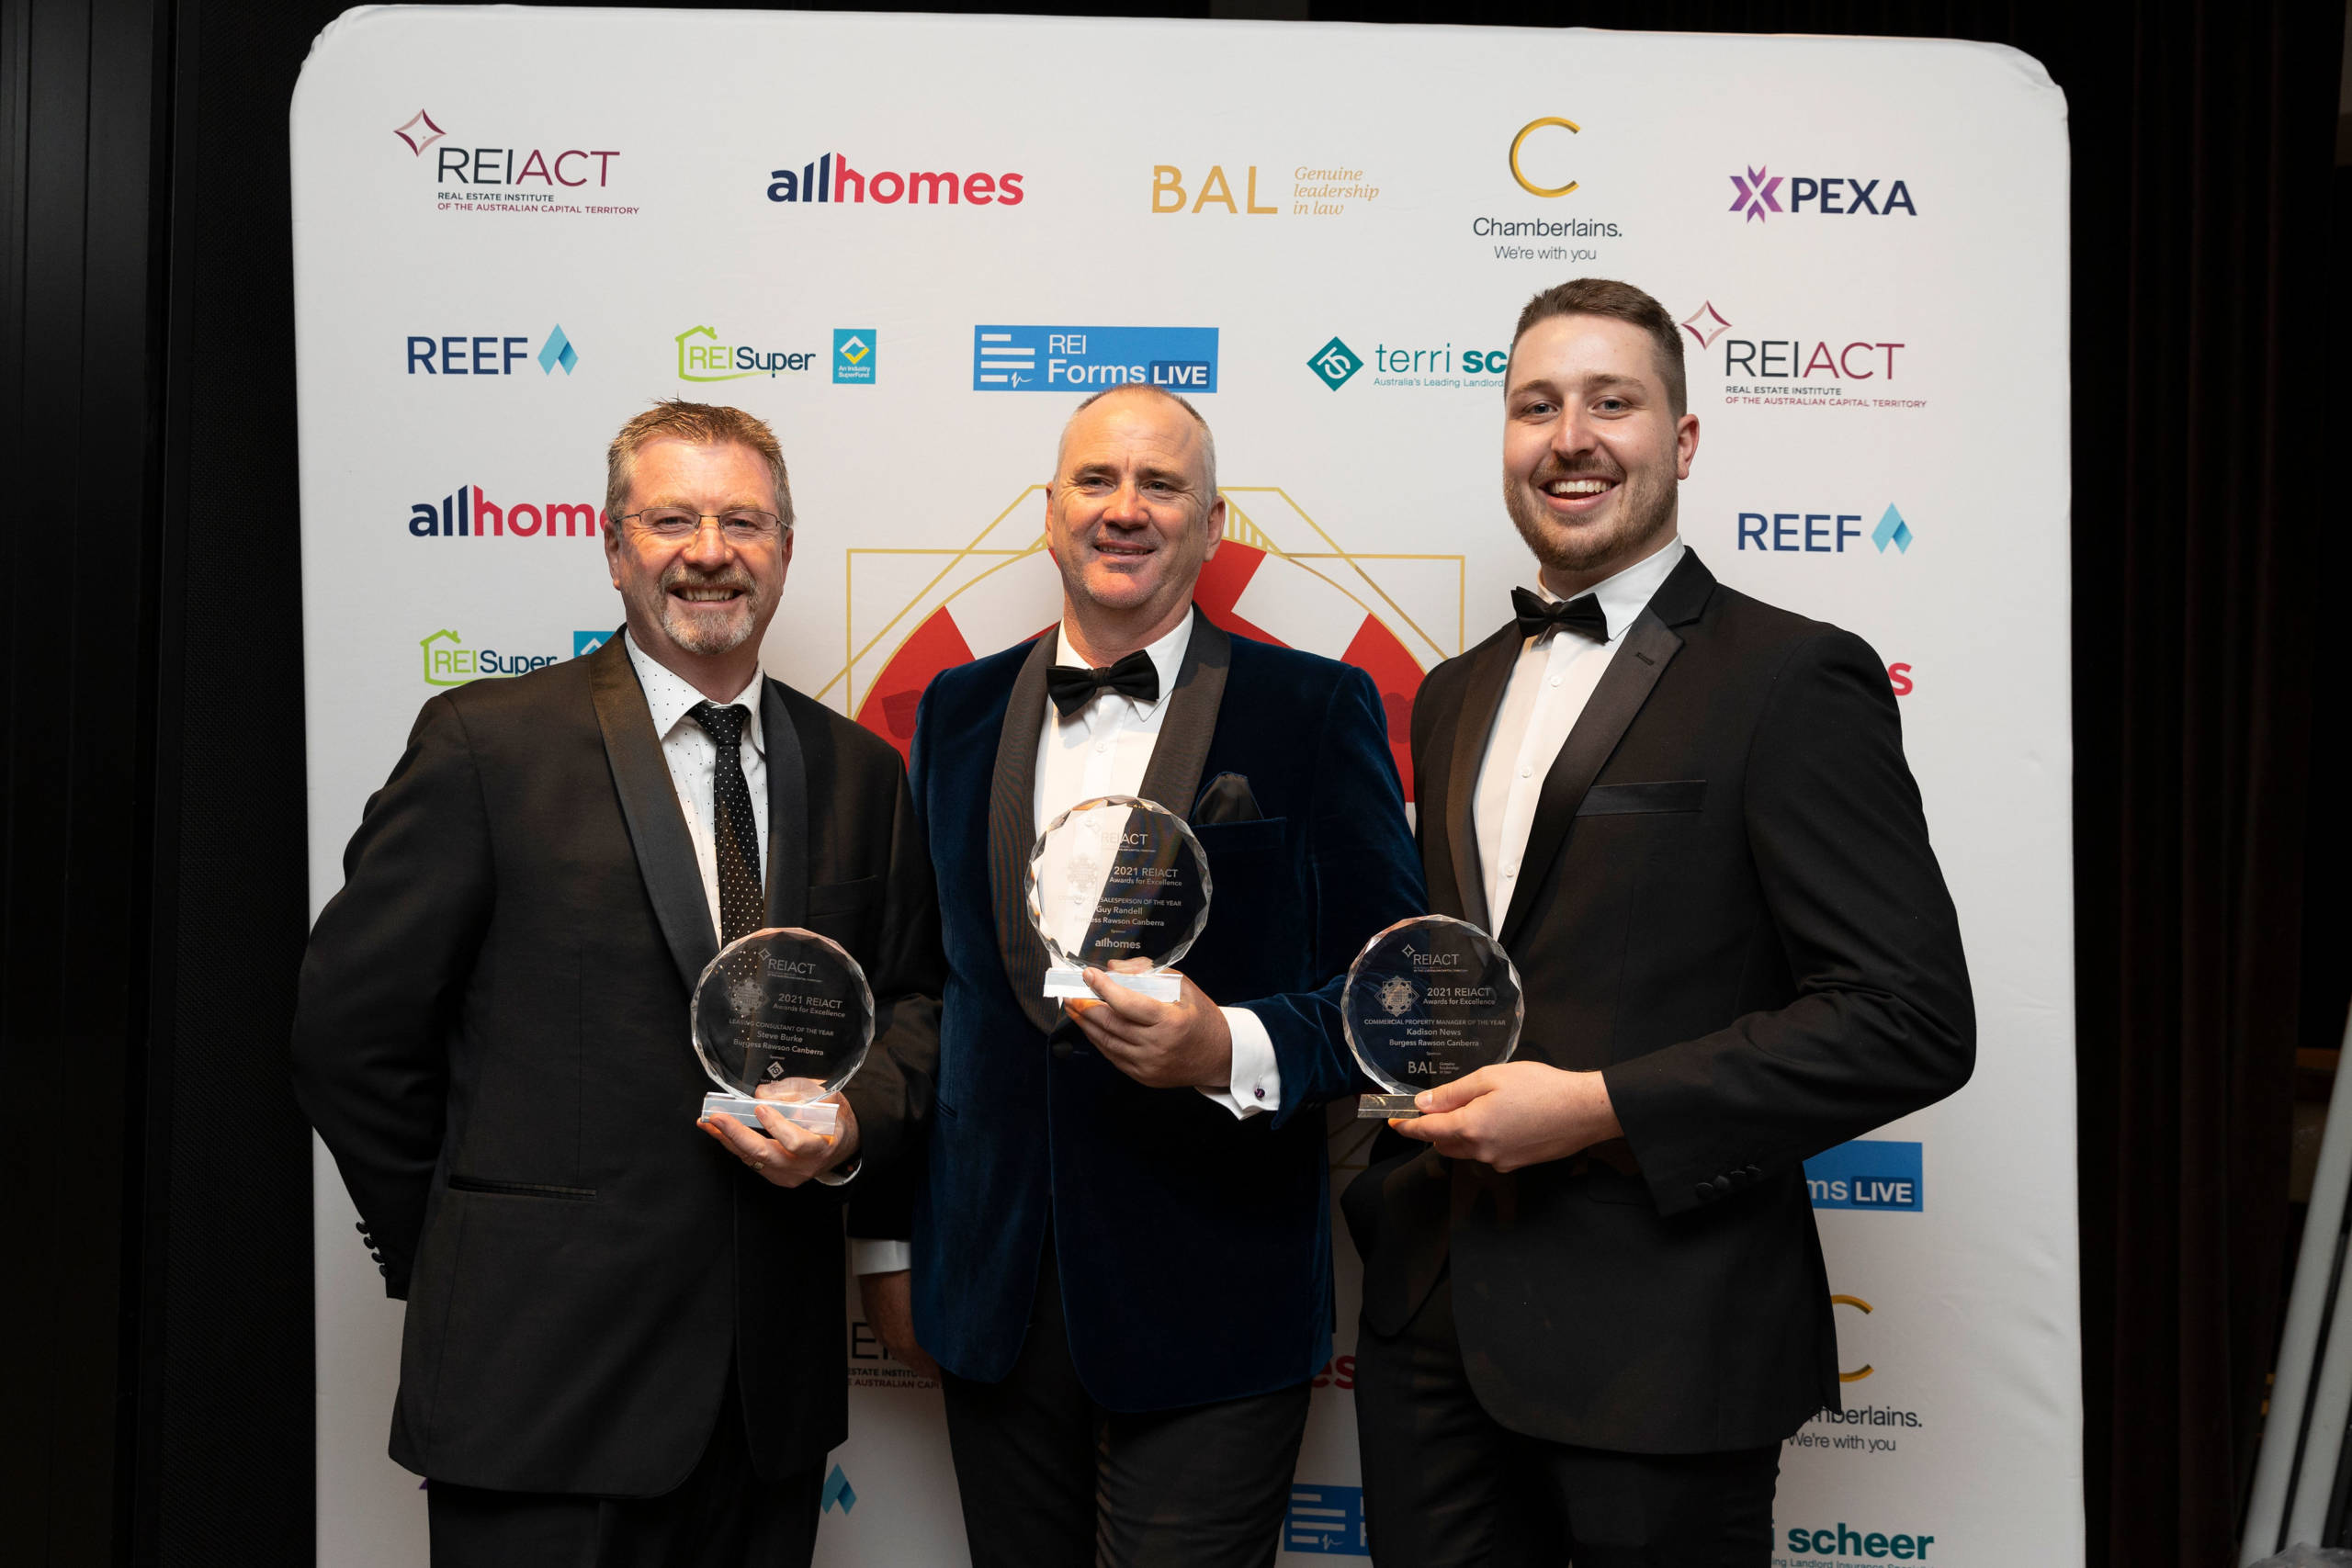 Three for three: Burgess Rawson Canberra takes out three REIACT Awards, Guy Randell named Commercial Salesperson of the Year for third consecutive year